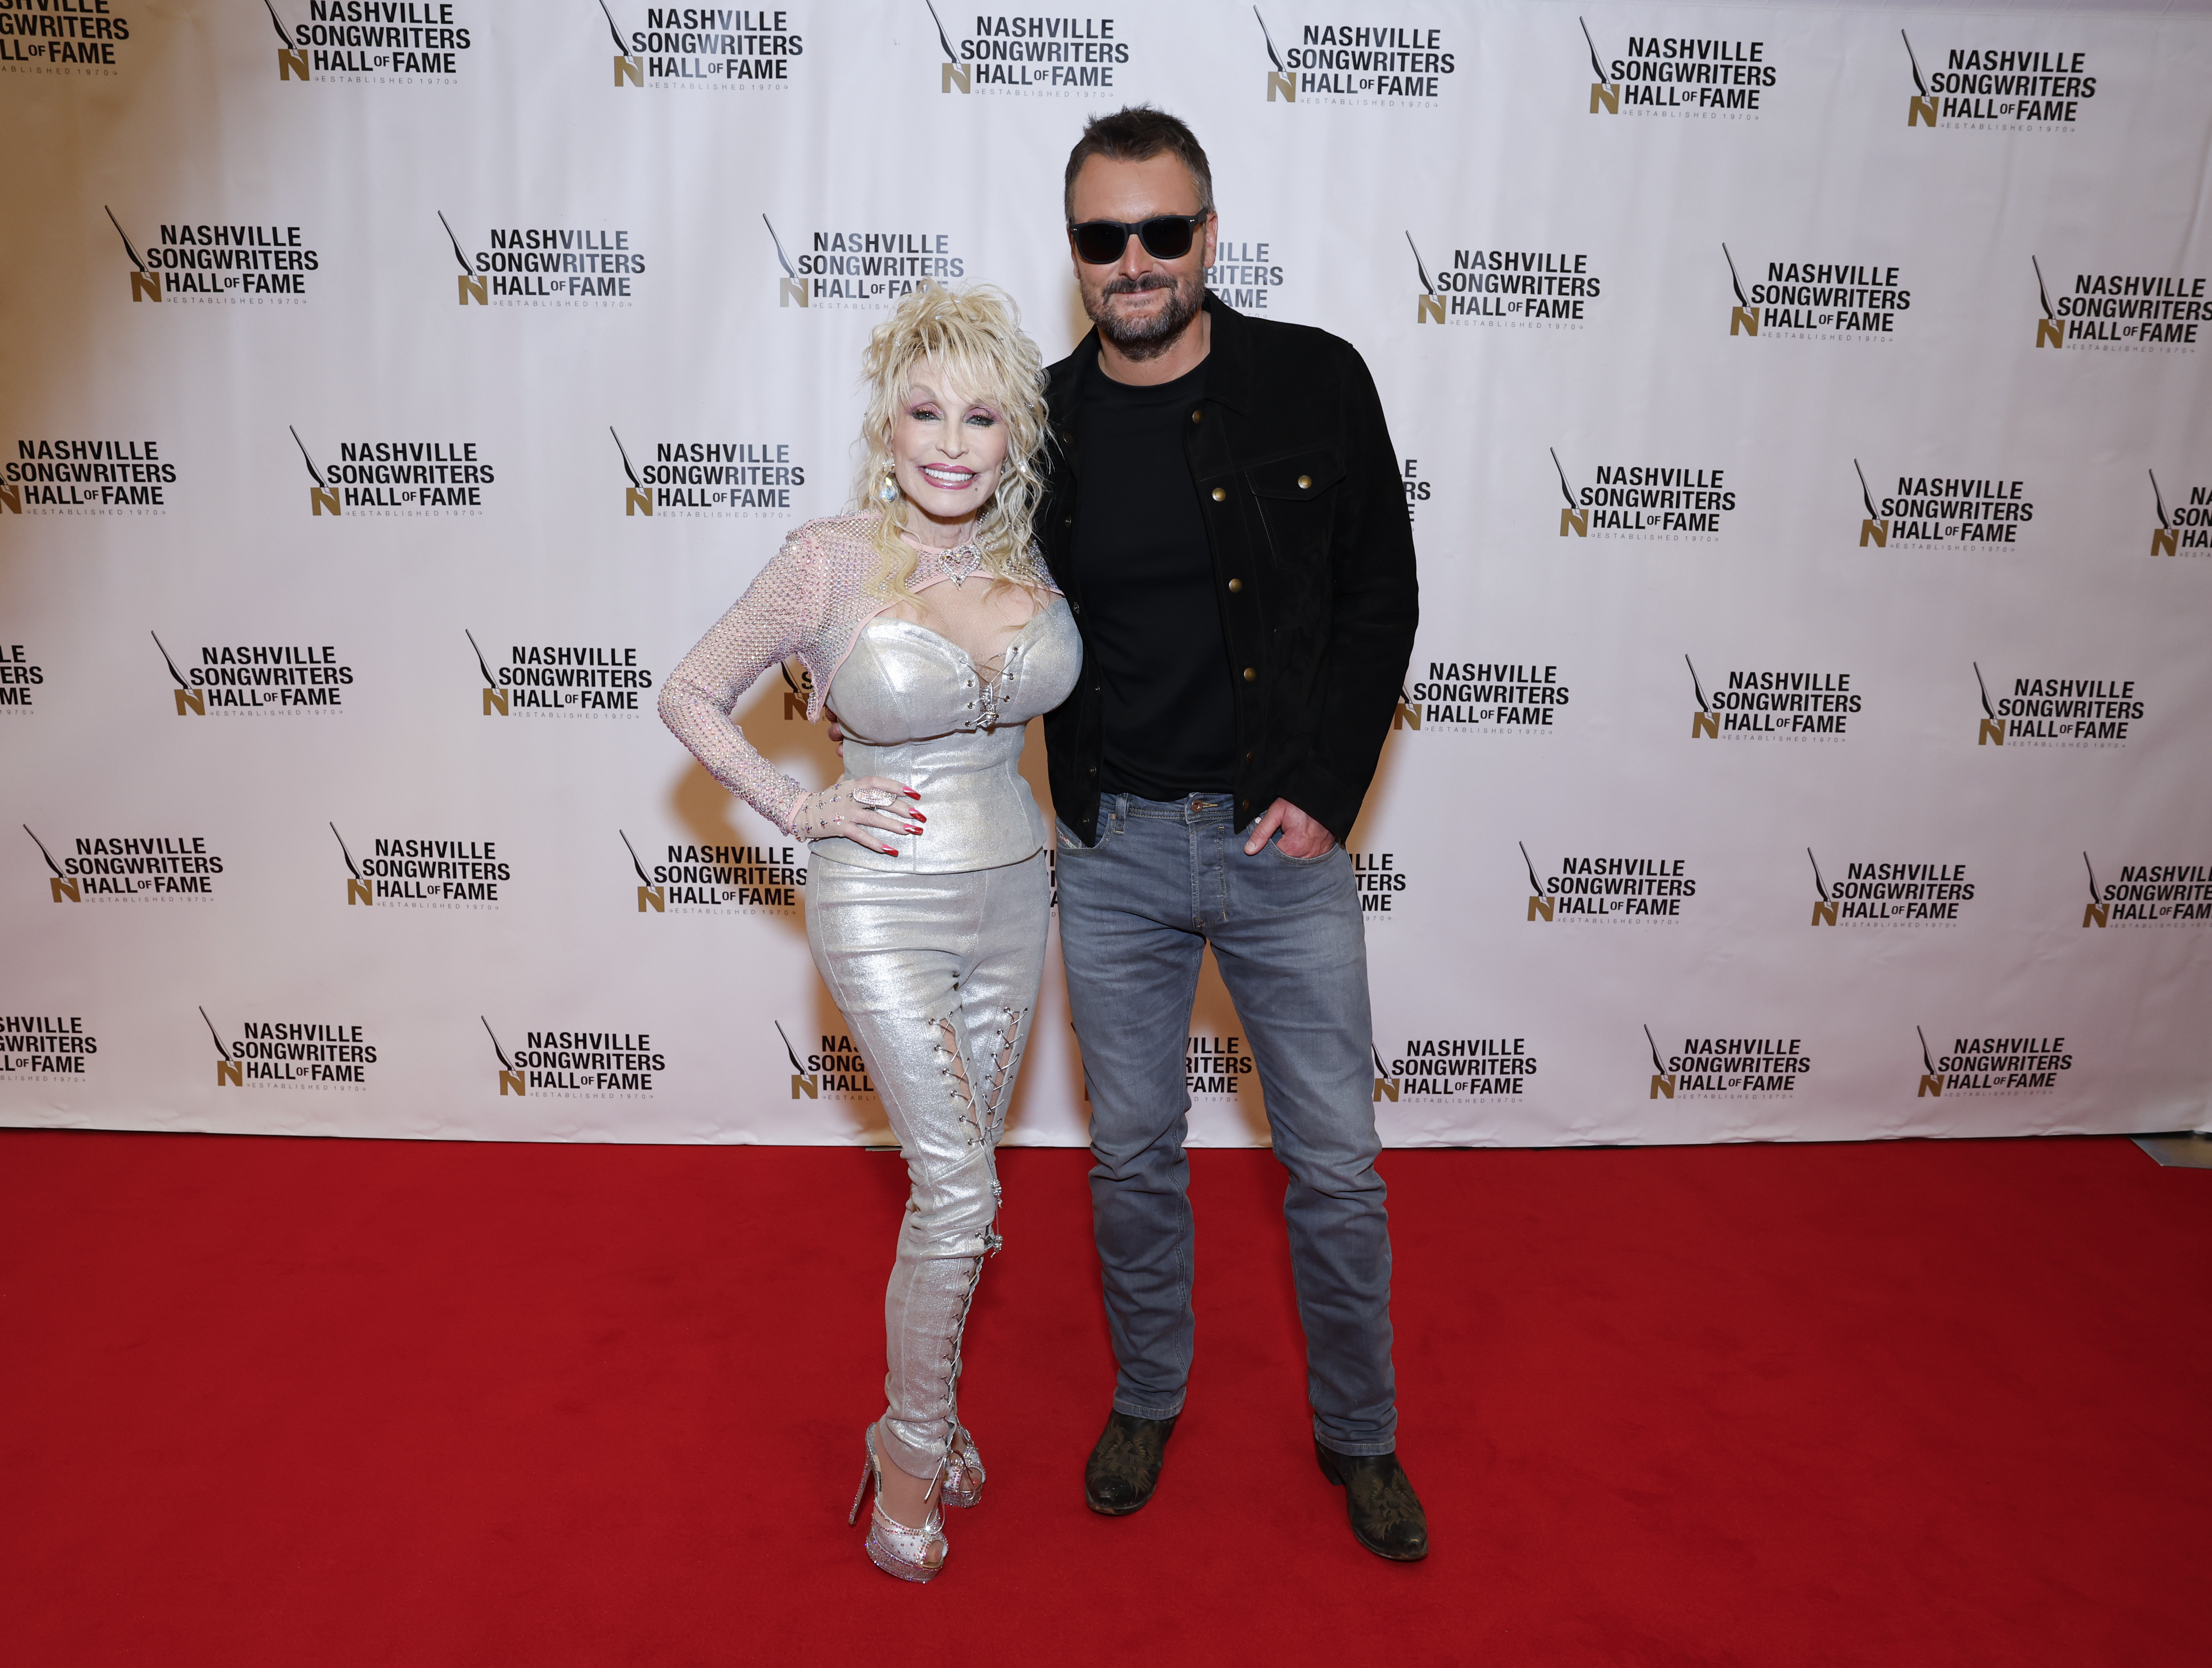 Dolly Parton and Eric Church at the 53rd Anniversary Nashville Songwriters Hall of Fame Gala at Music City Center on October 11, 2023, in Nashville, Tennessee. | Source: Getty Images